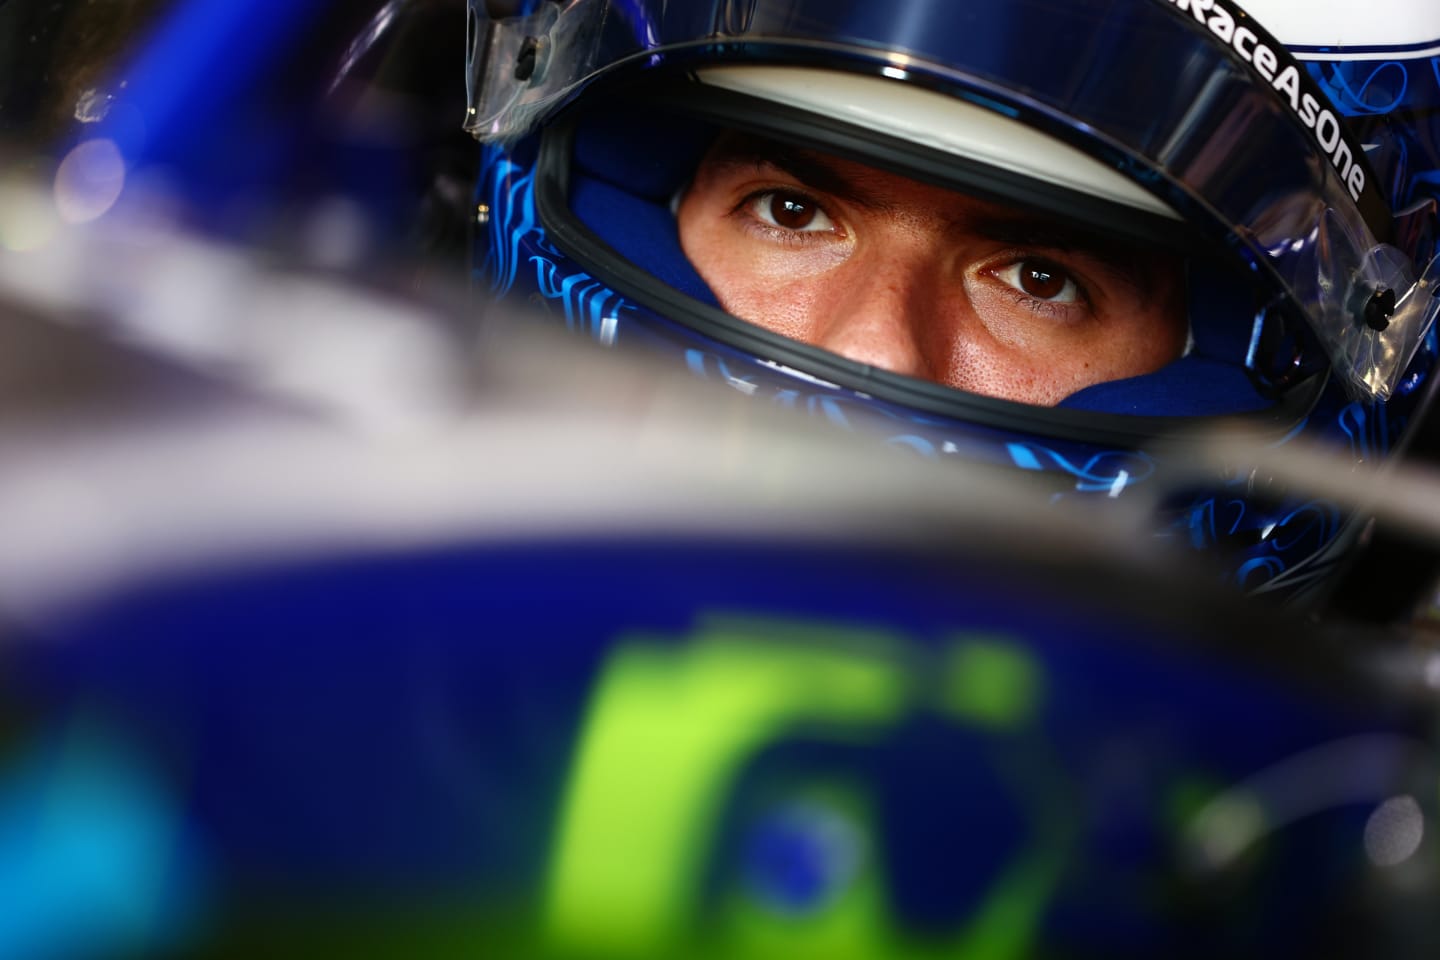 MIAMI, FLORIDA - MAY 07: Nicholas Latifi of Canada and Williams prepares to drive in the garage during final practice ahead of the F1 Grand Prix of Miami at the Miami International Autodrome on May 07, 2022 in Miami, Florida. (Photo by Mark Thompson/Getty Images)